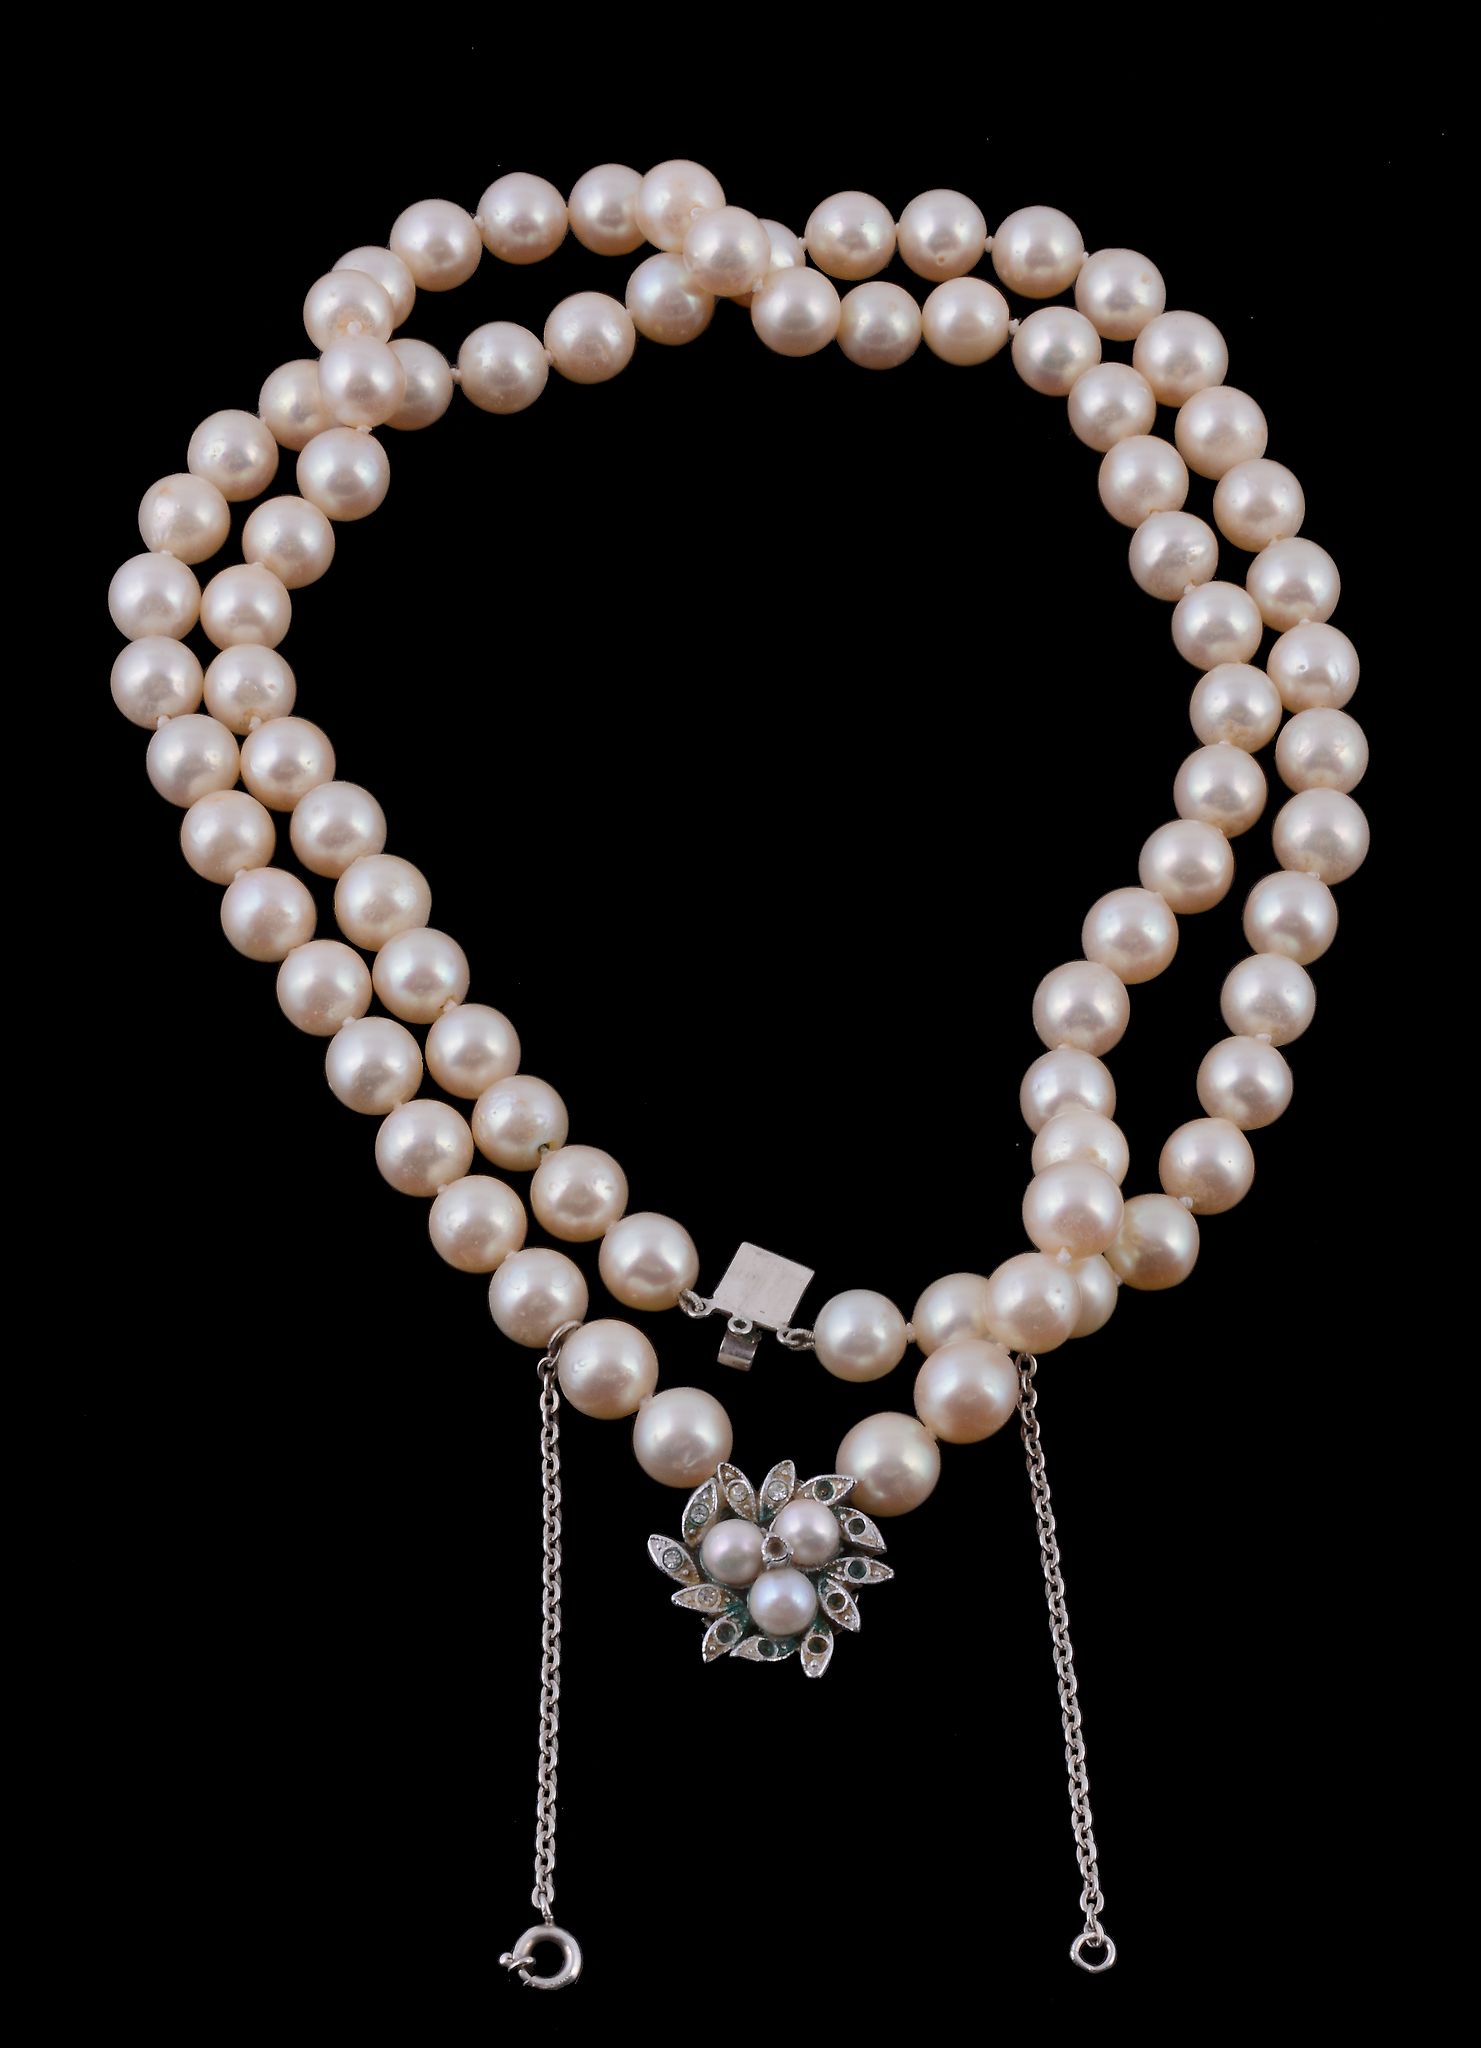 A two row cultured pearl necklace, composed of uniform cultured pearls, to a concealed clasp set